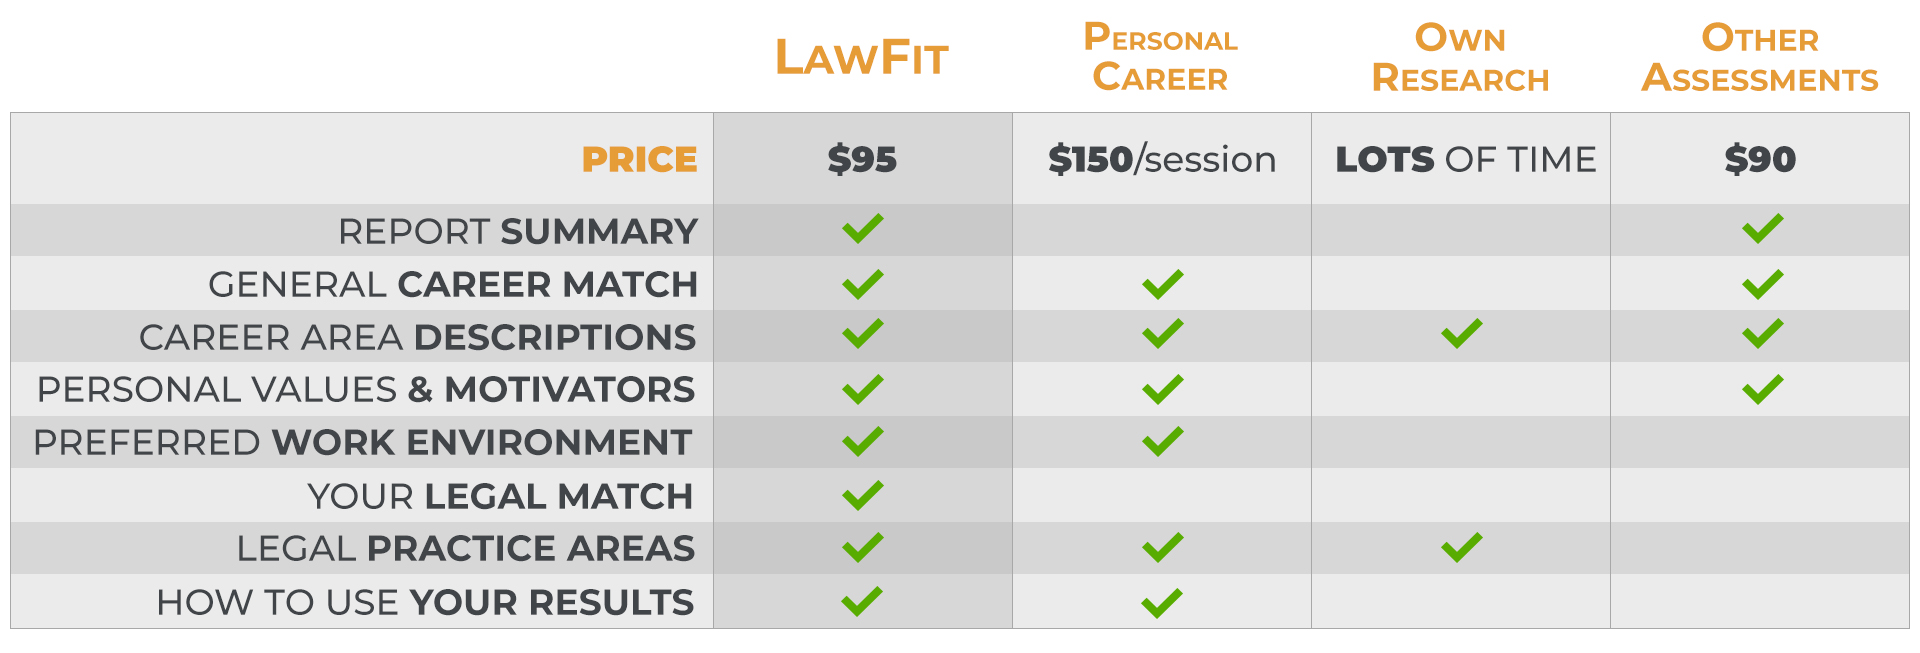 WHAT IS LAWFIT